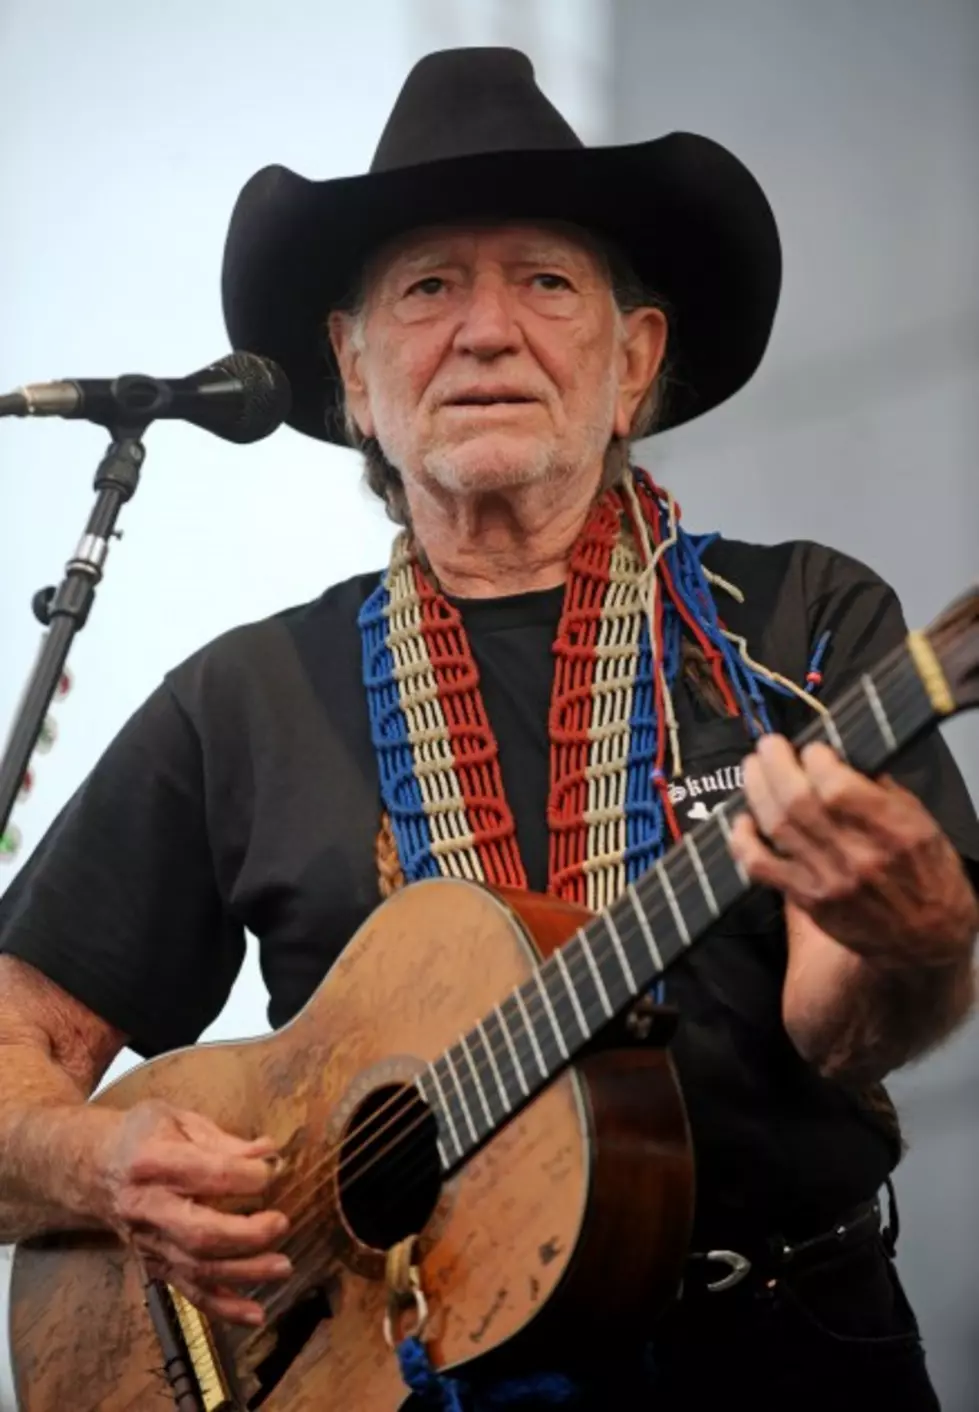 And The Answer To Our Mystery &#8220;Pixilated Pixie&#8221; is:  WILLIE NELSON!